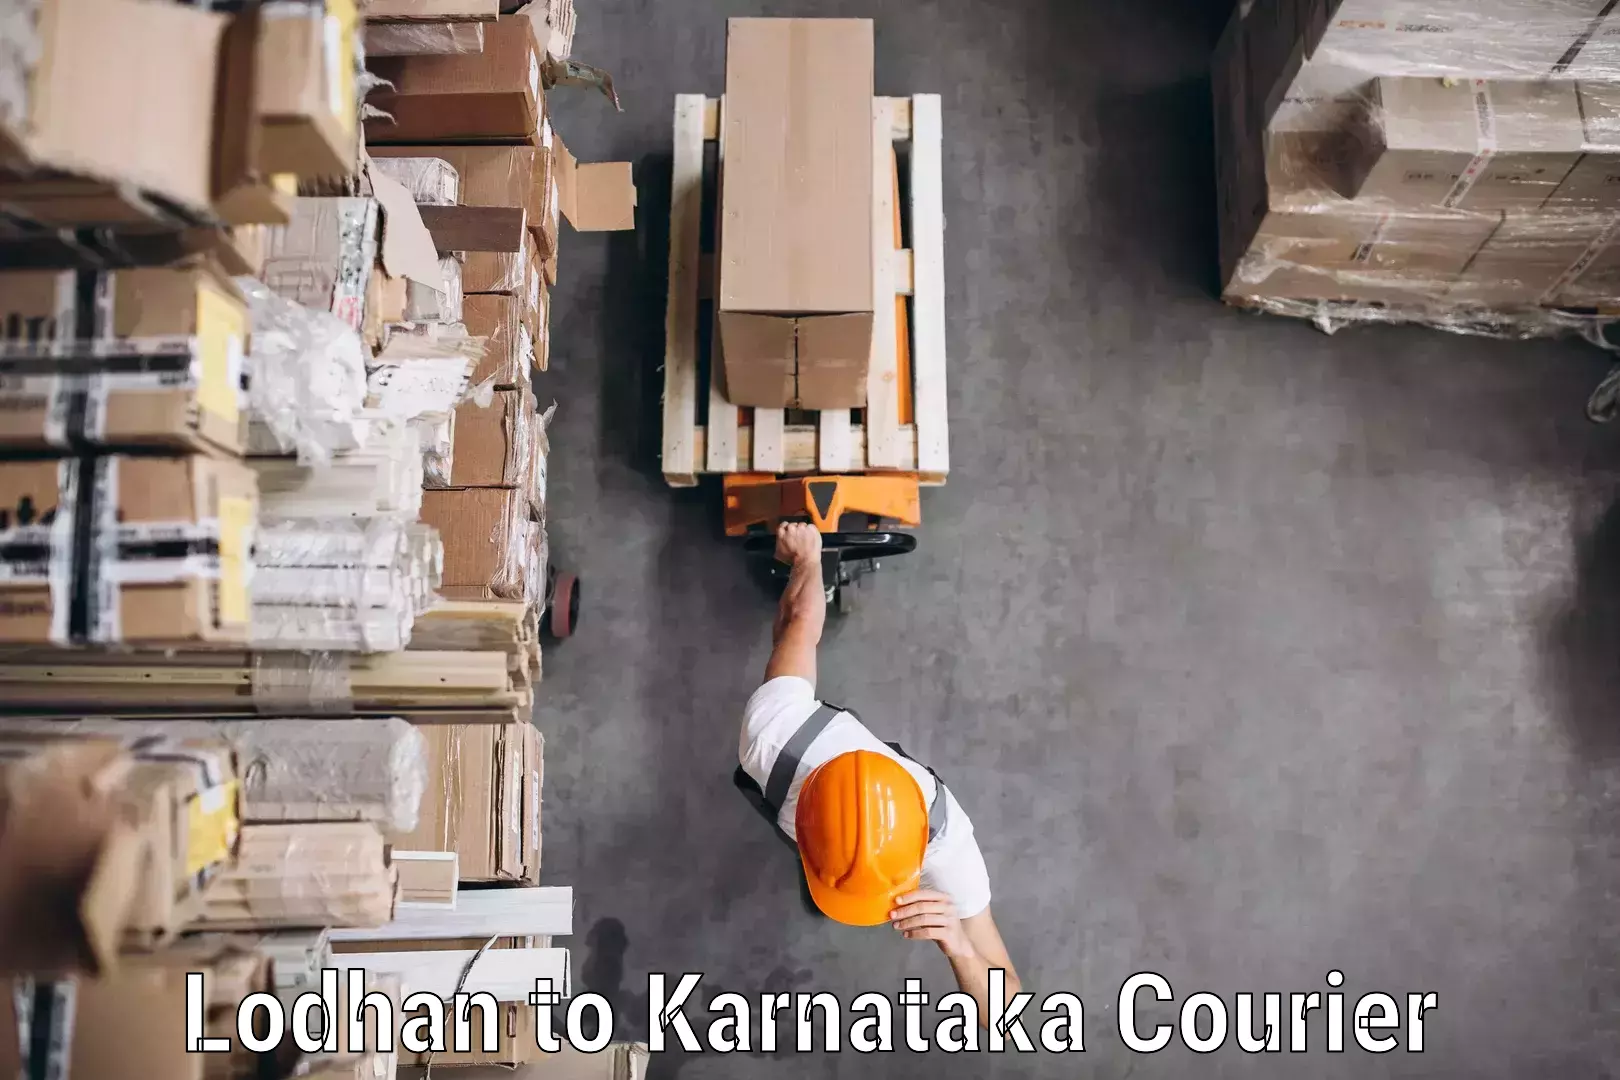 High-quality delivery services Lodhan to Karnataka